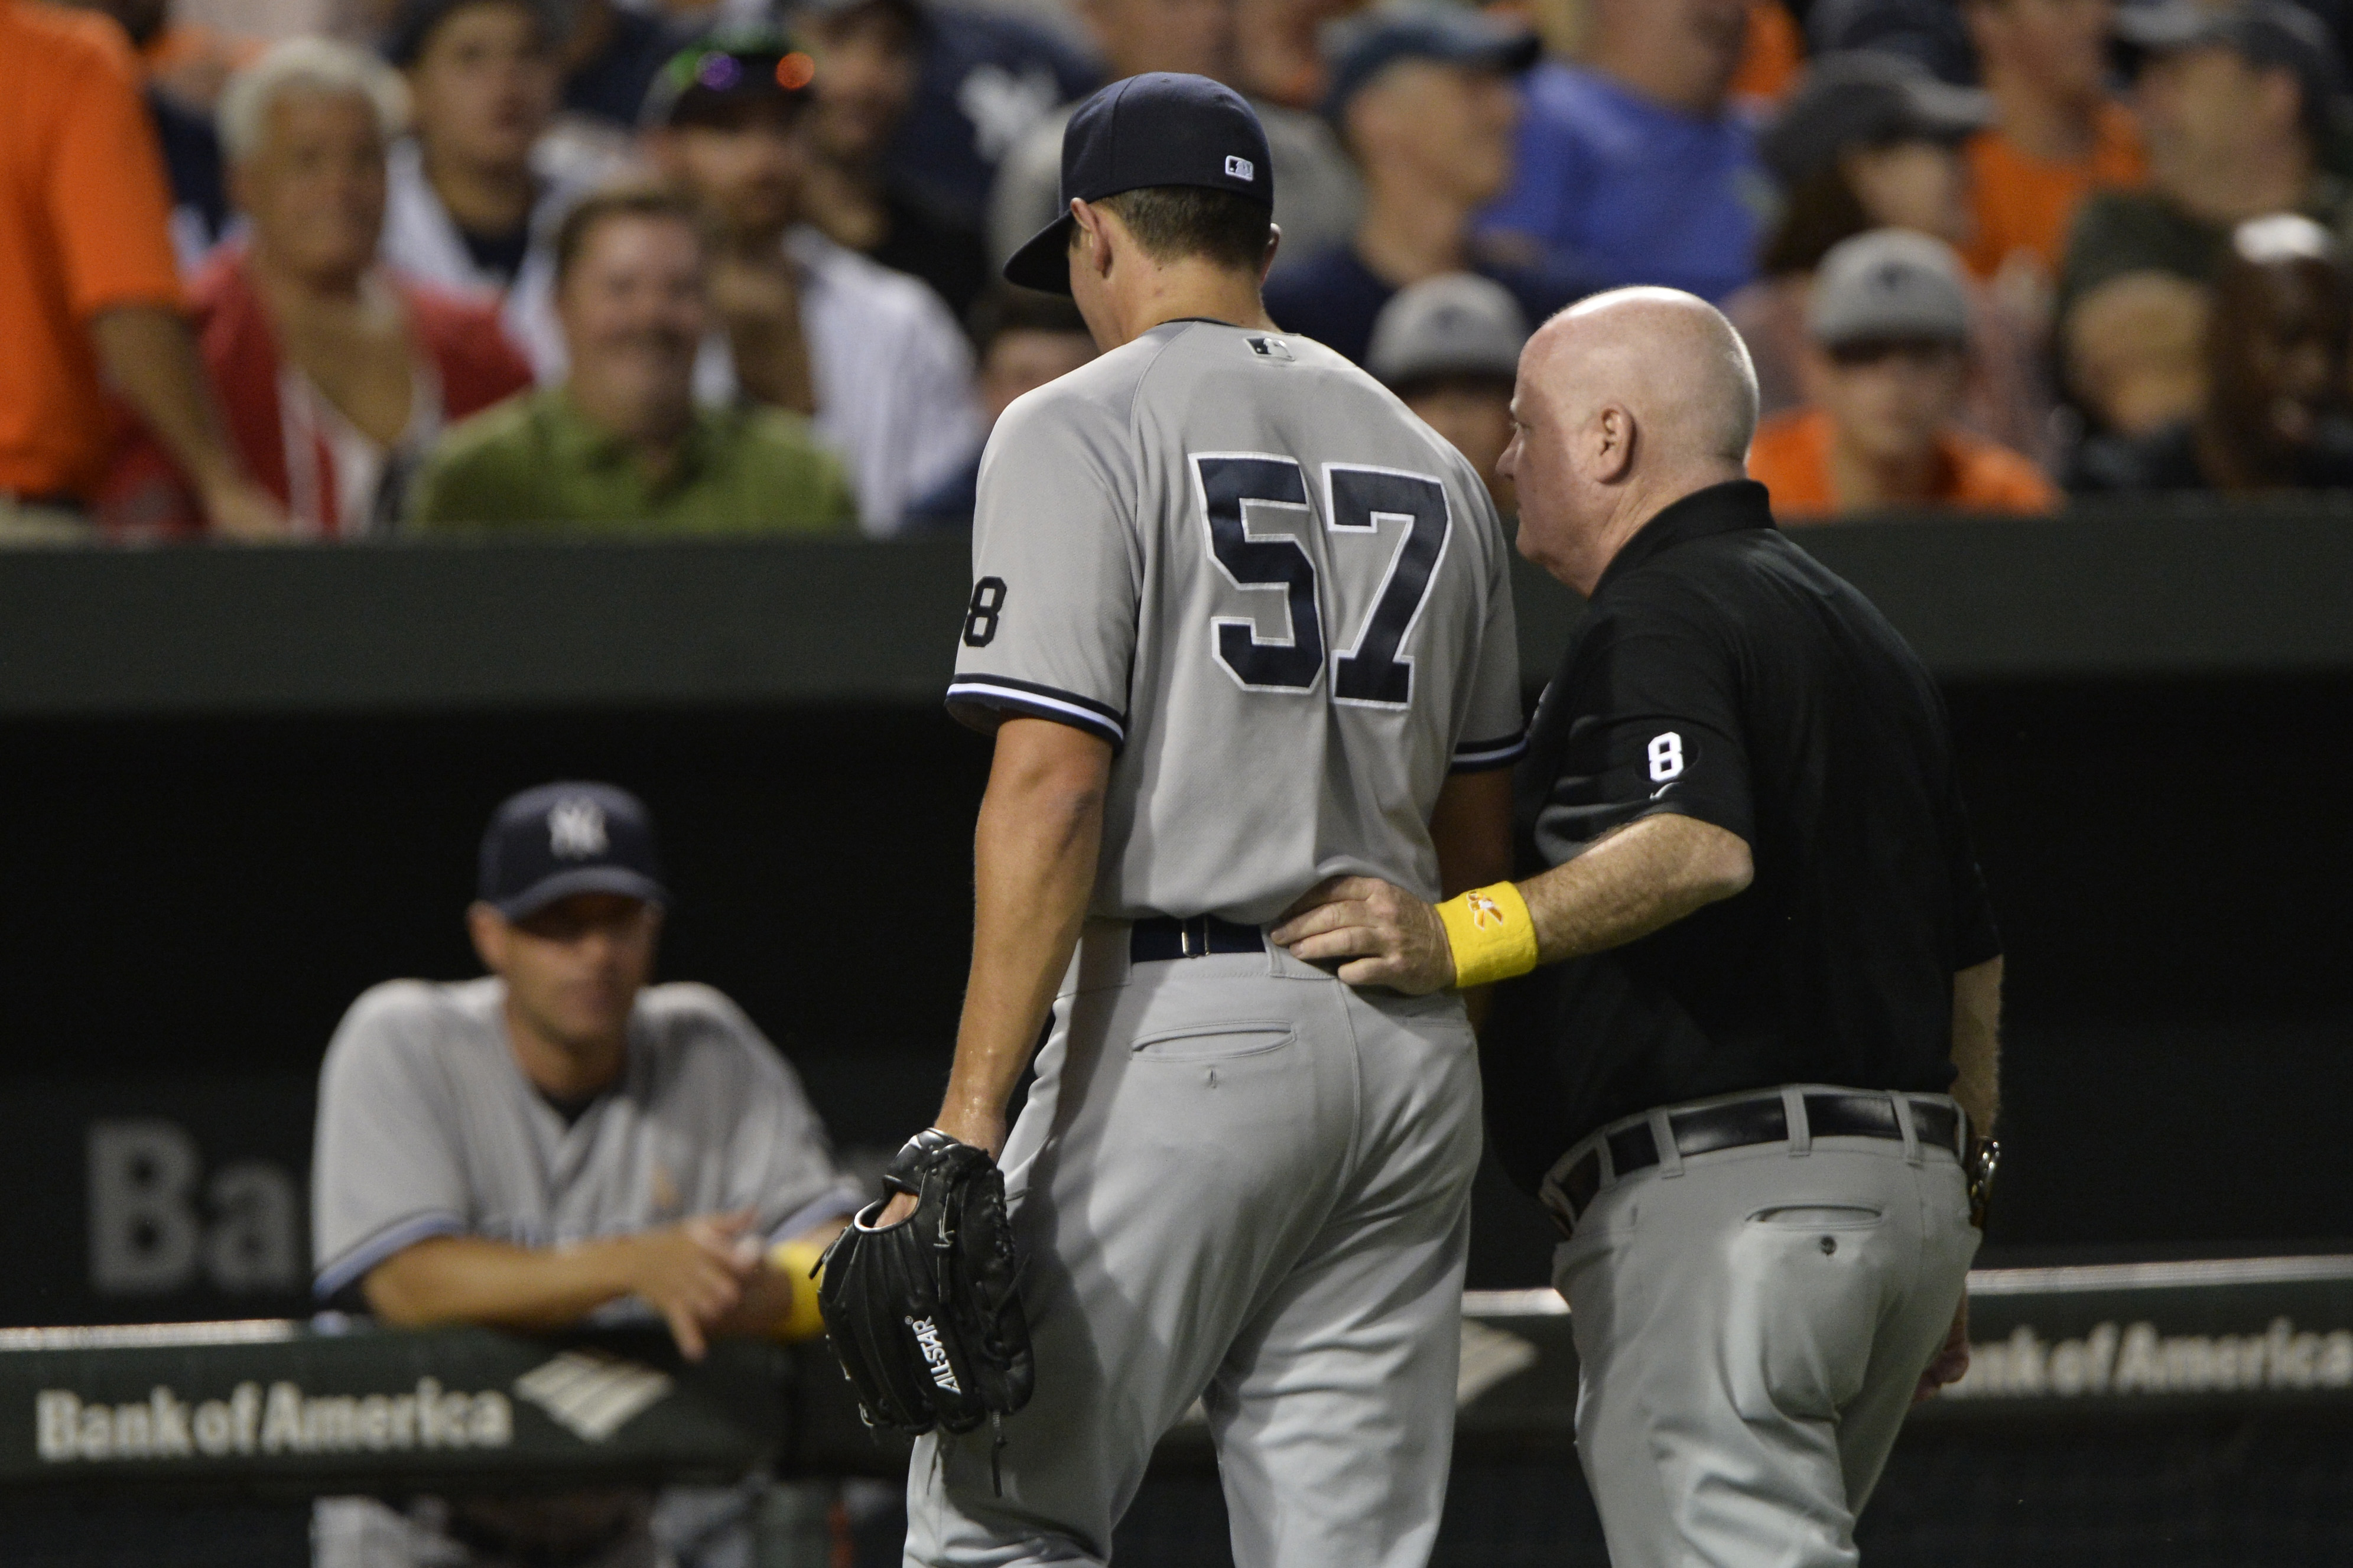 New York Yankees: Chad Green Leaves With Elbow Injury 2